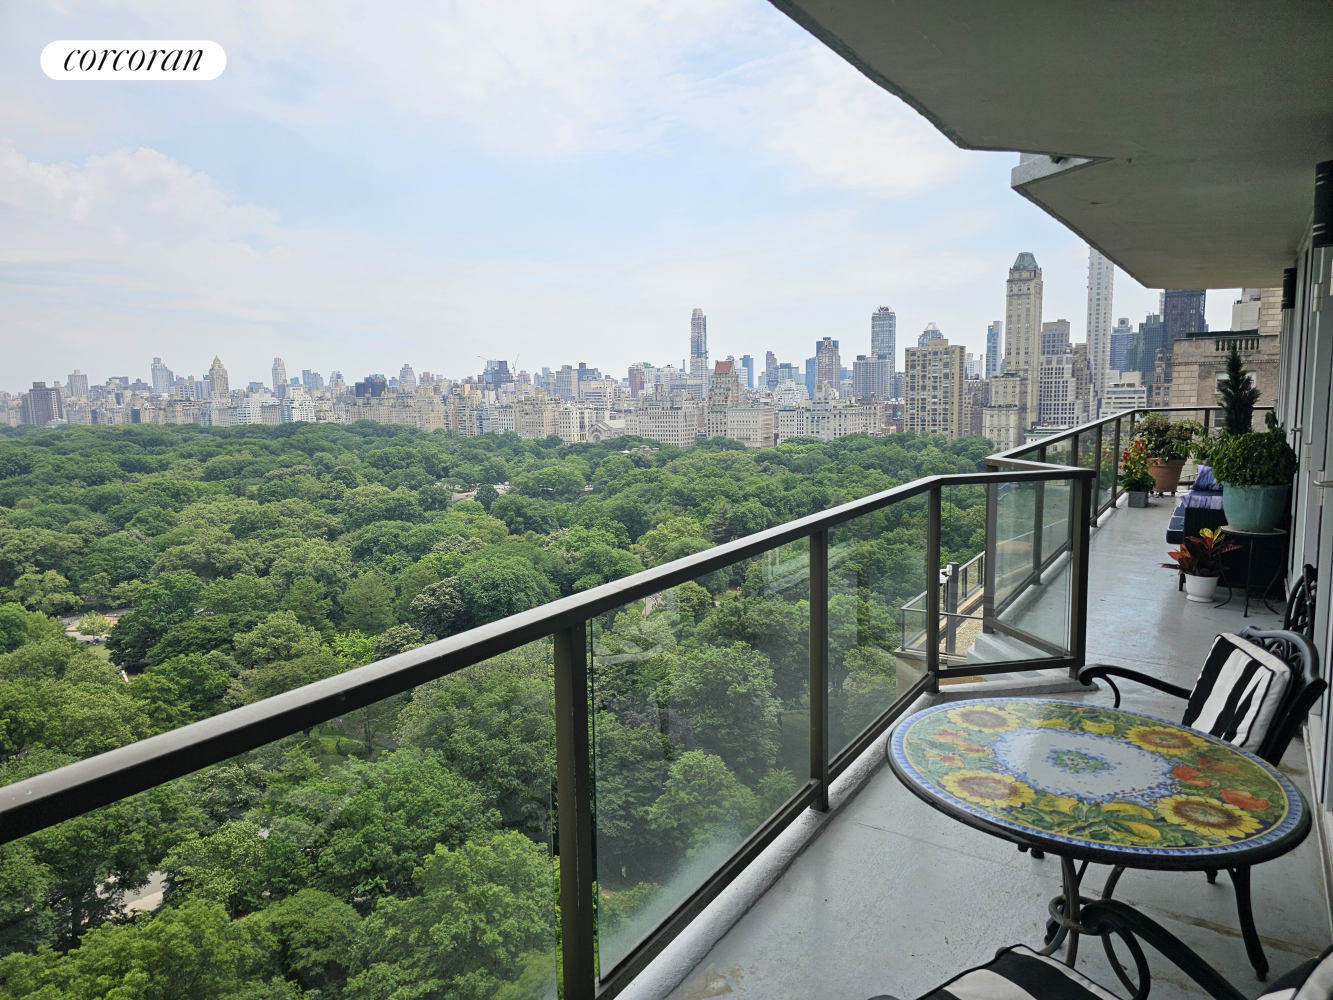 210 Central Park 23Cd, Central Park South, Midtown West, NYC - 2 Bedrooms  
2.5 Bathrooms  
8 Rooms - 